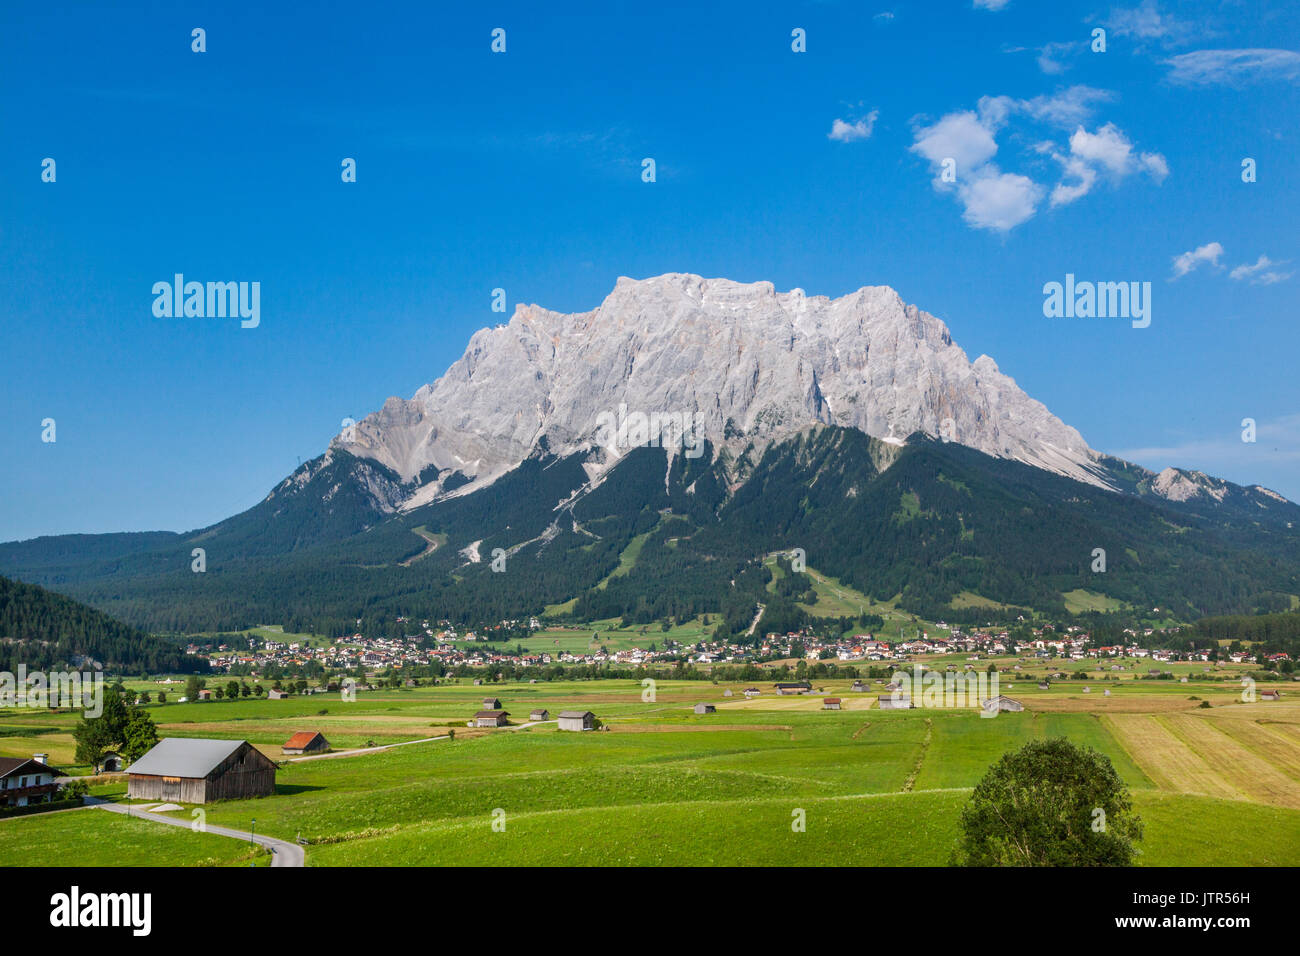 Austria, Tyrol, Northern Limestone Alps in the Eastern Alps, view of the Wetterstein Mountains with the Zugspitze Group across the Ehrwald Basin. Stock Photo